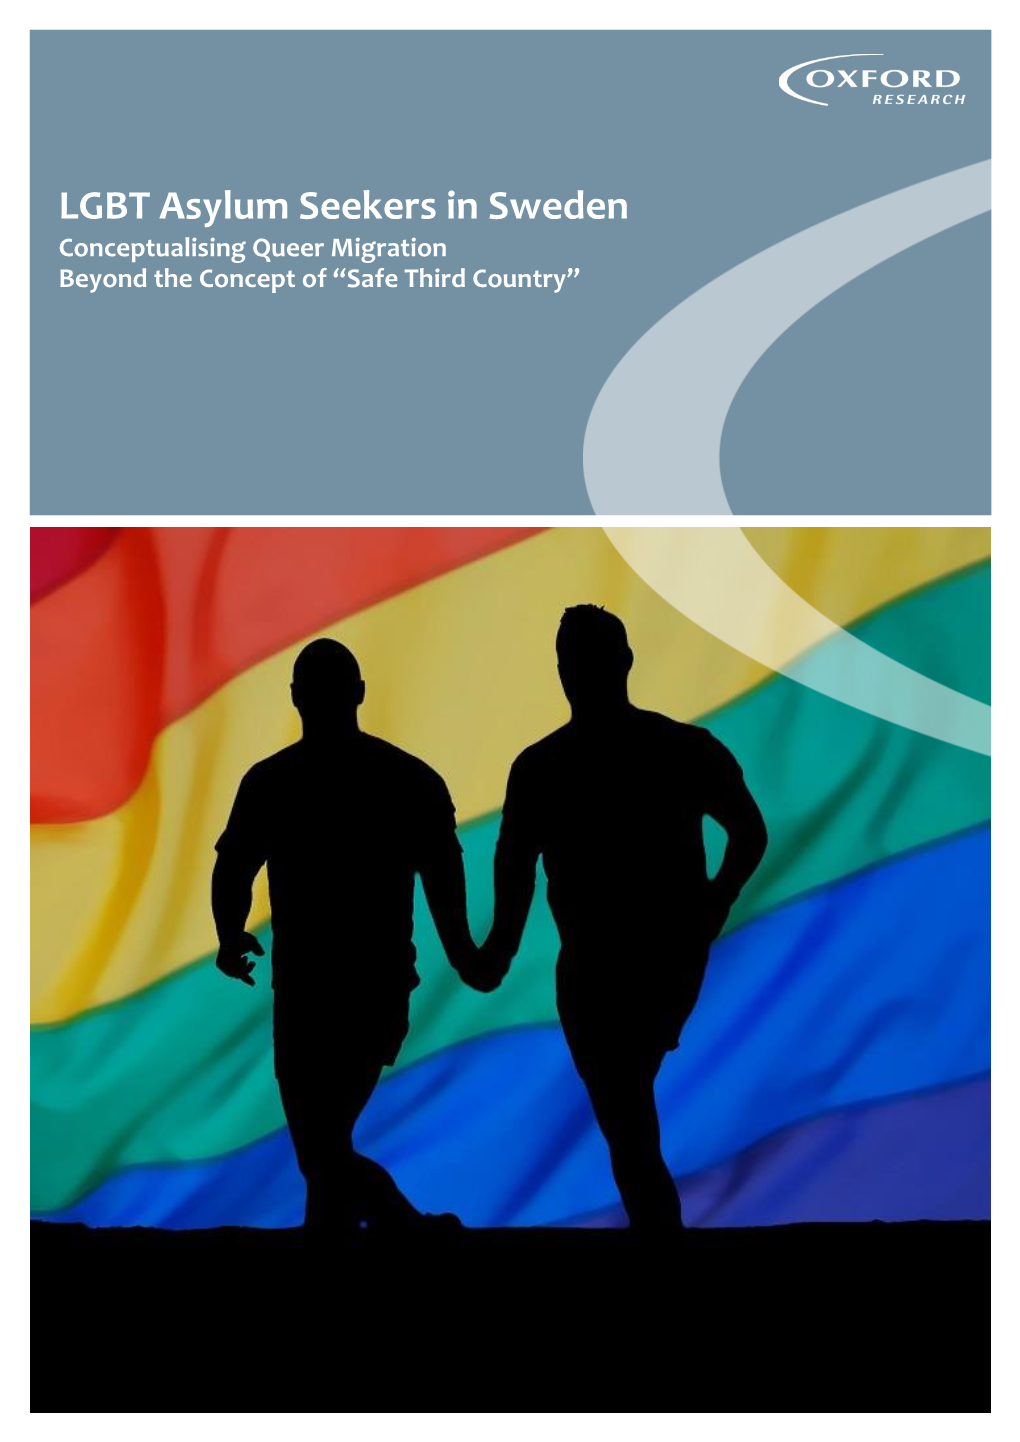 LGBT Asylum Seekers in Sweden Conceptualising Queer Migration Beyond the Concept of “Safe Third Country”